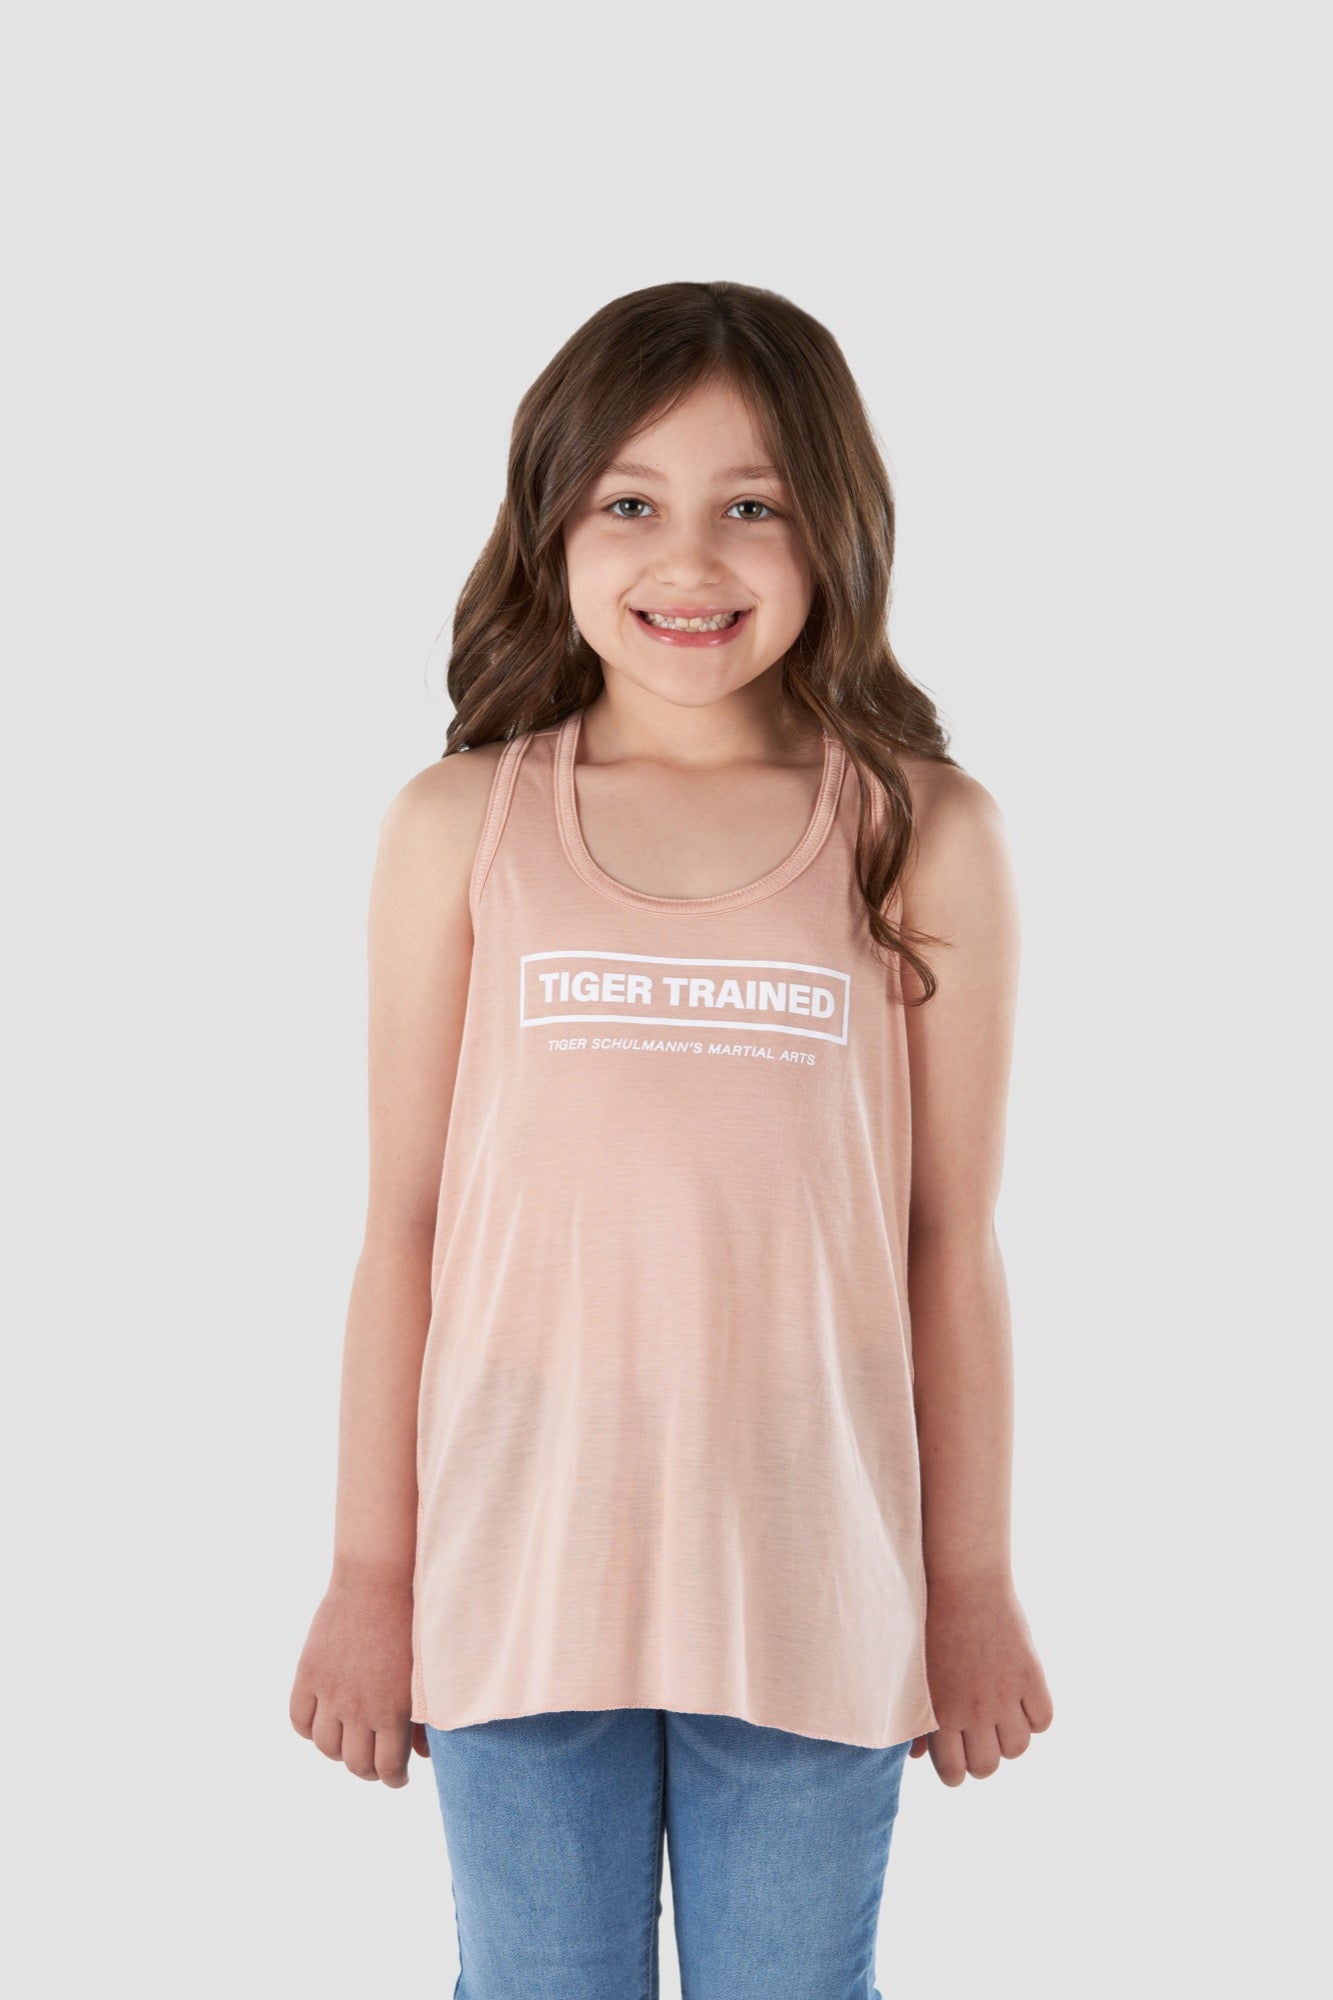 'Tiger Trained' Girl's Tank